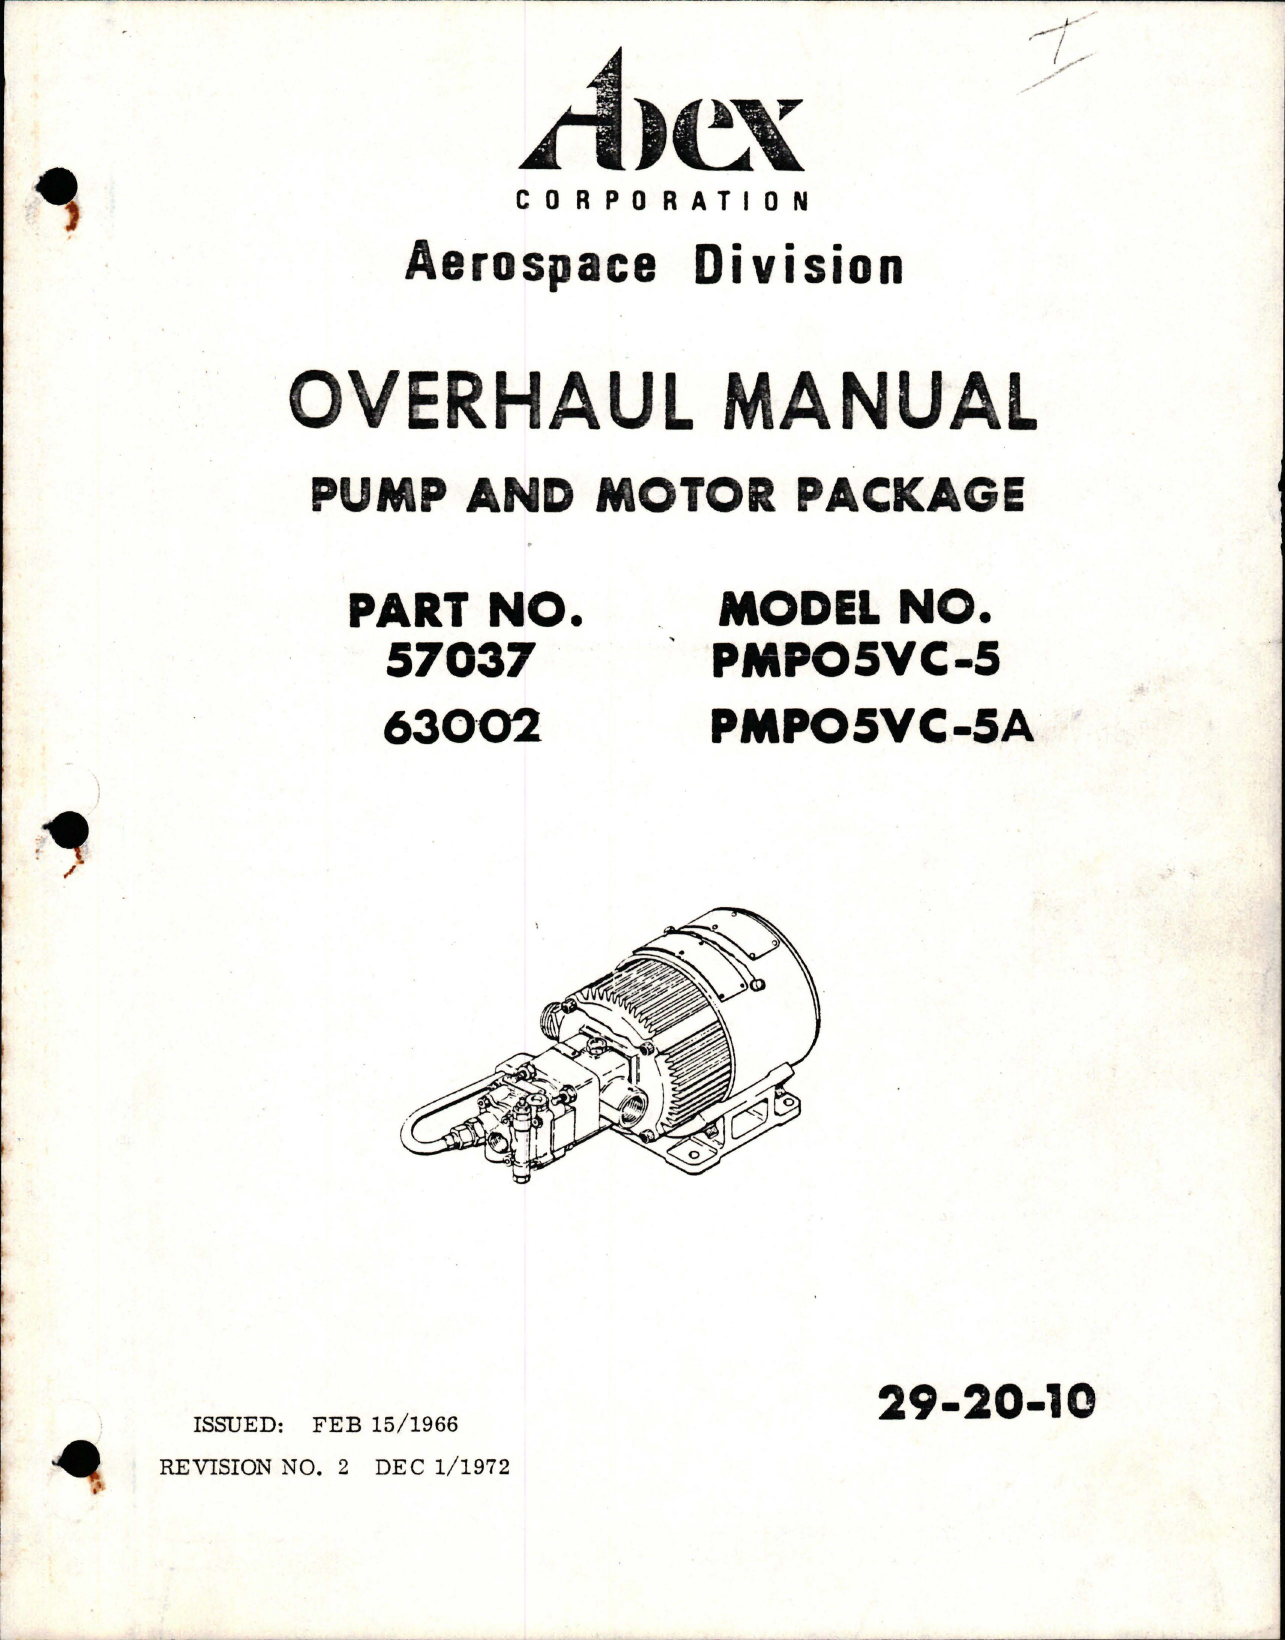 Sample page 1 from AirCorps Library document: Overhaul Manual for Pump and Motor Package - Parts 57037, 63002 - Models PMP05VC-5 and PMP05VC-5A 